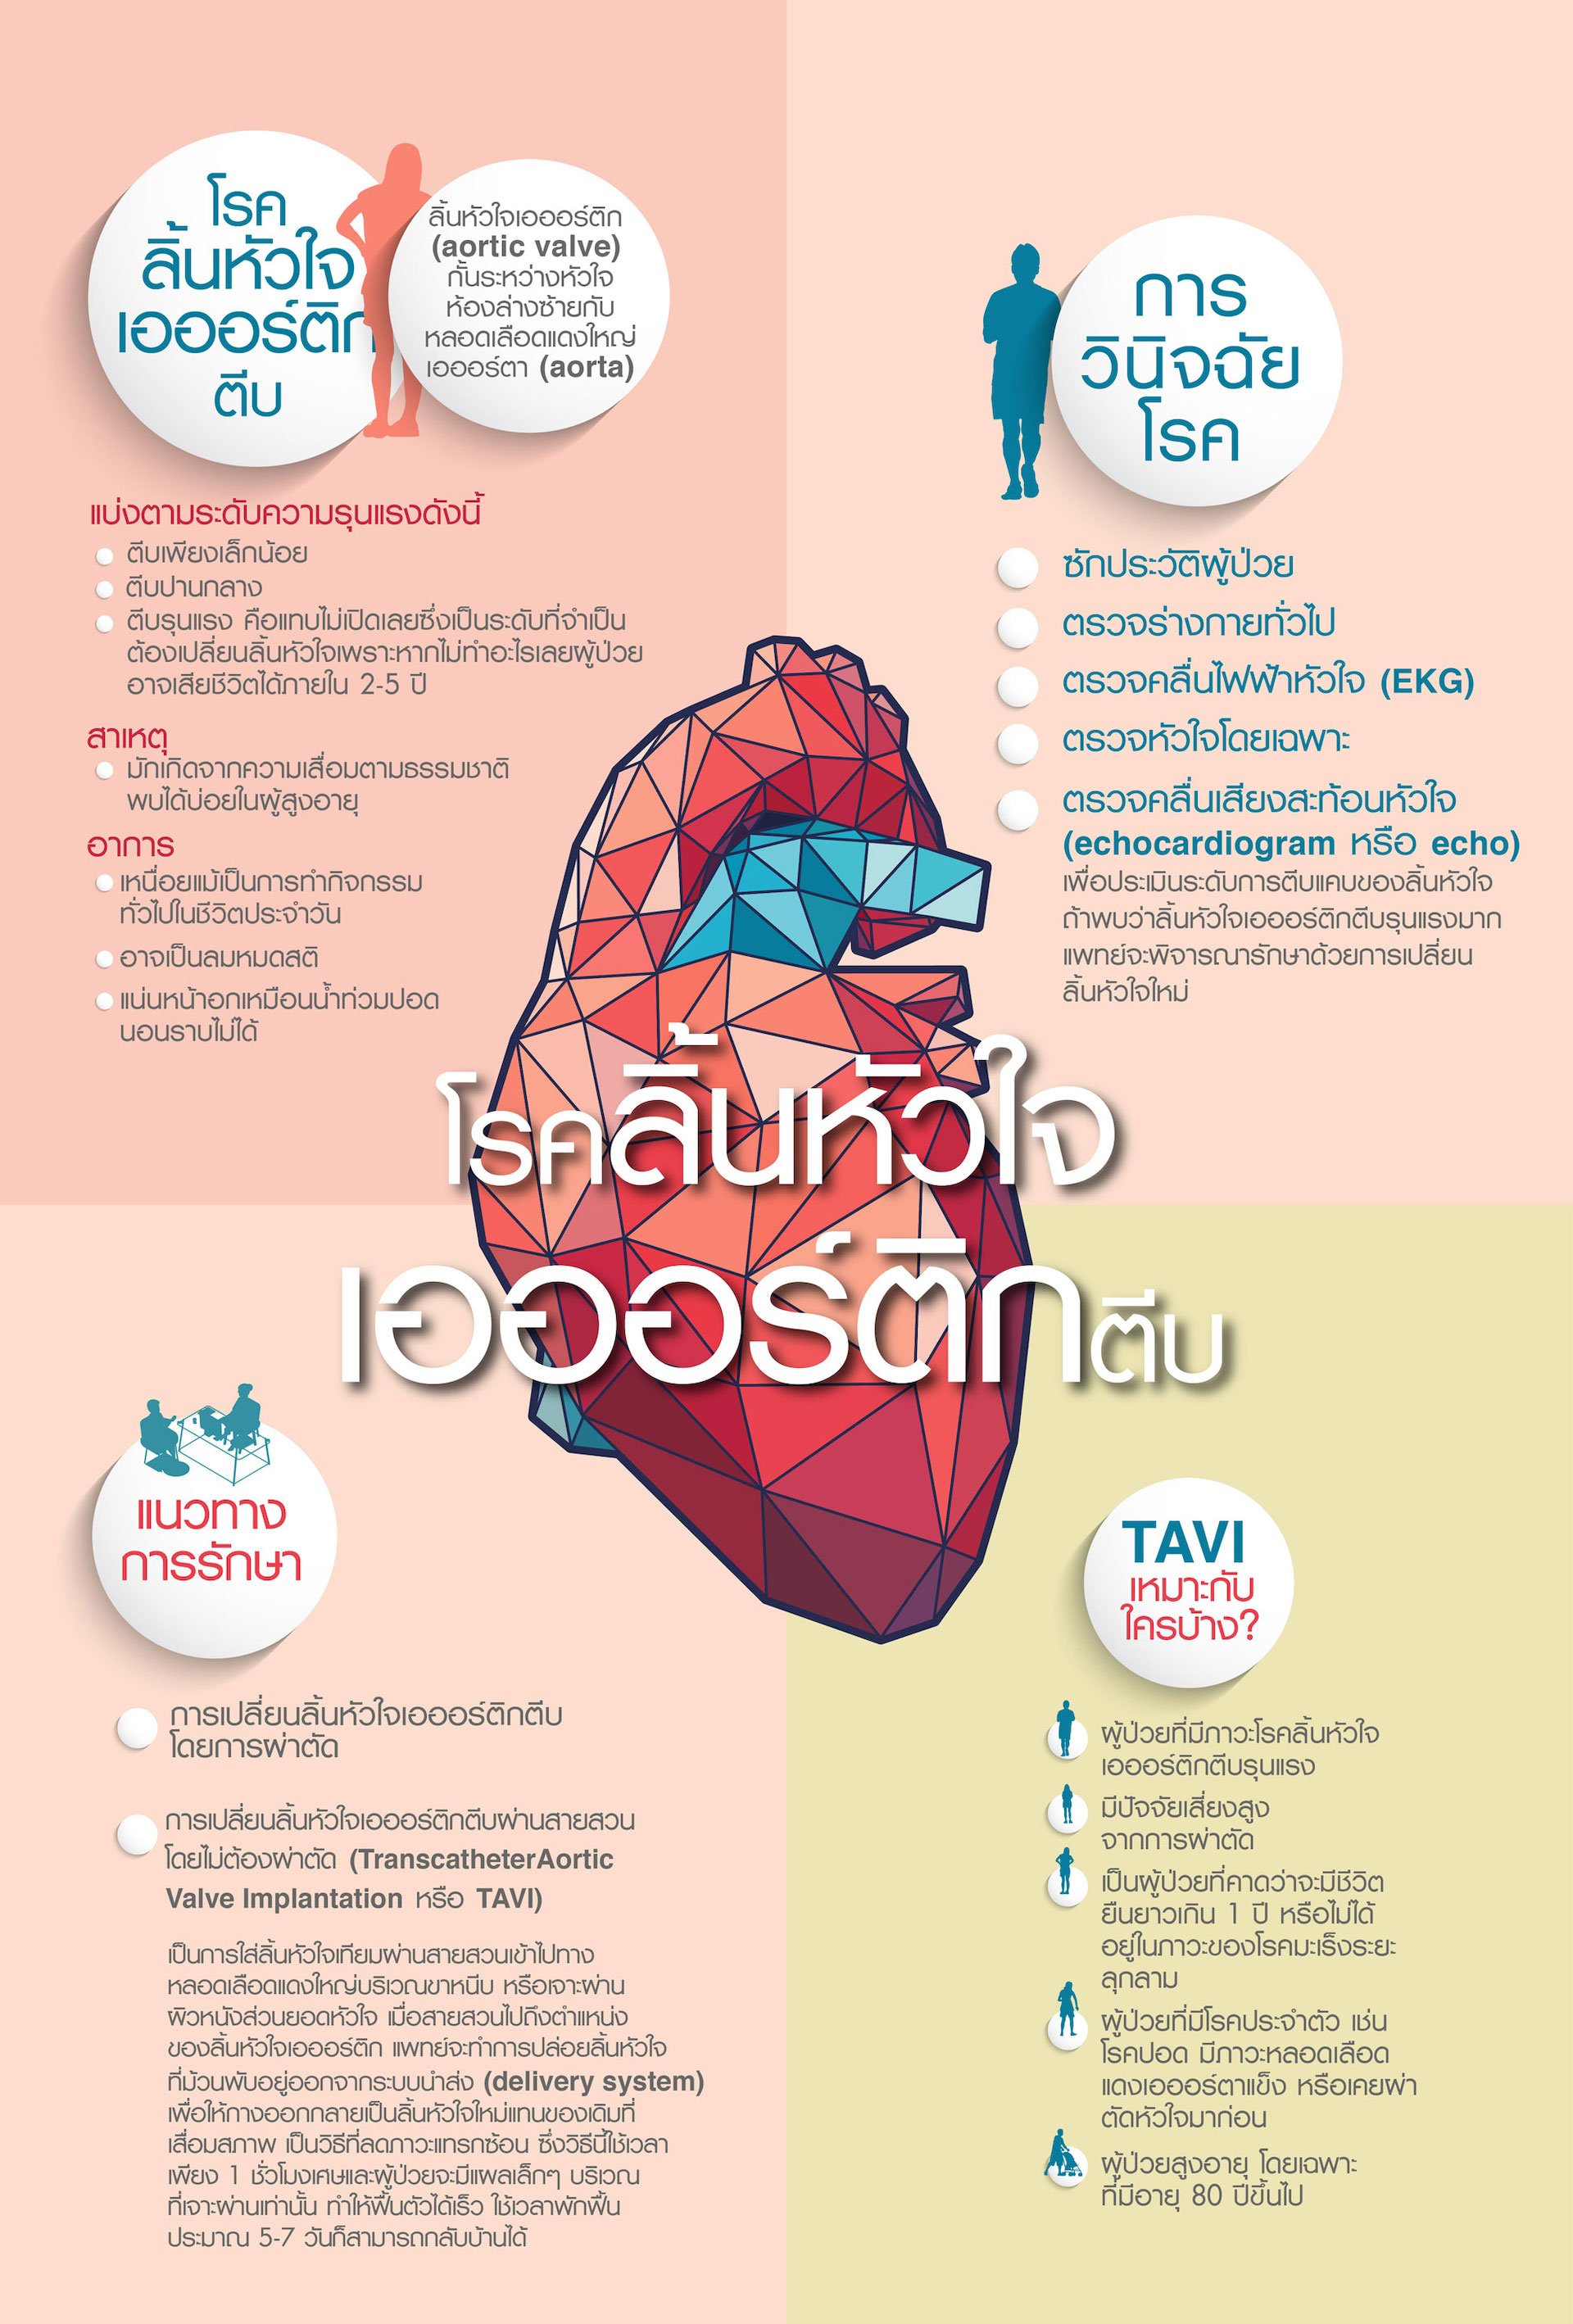 aortic-valve-surgery-infographic.jpg